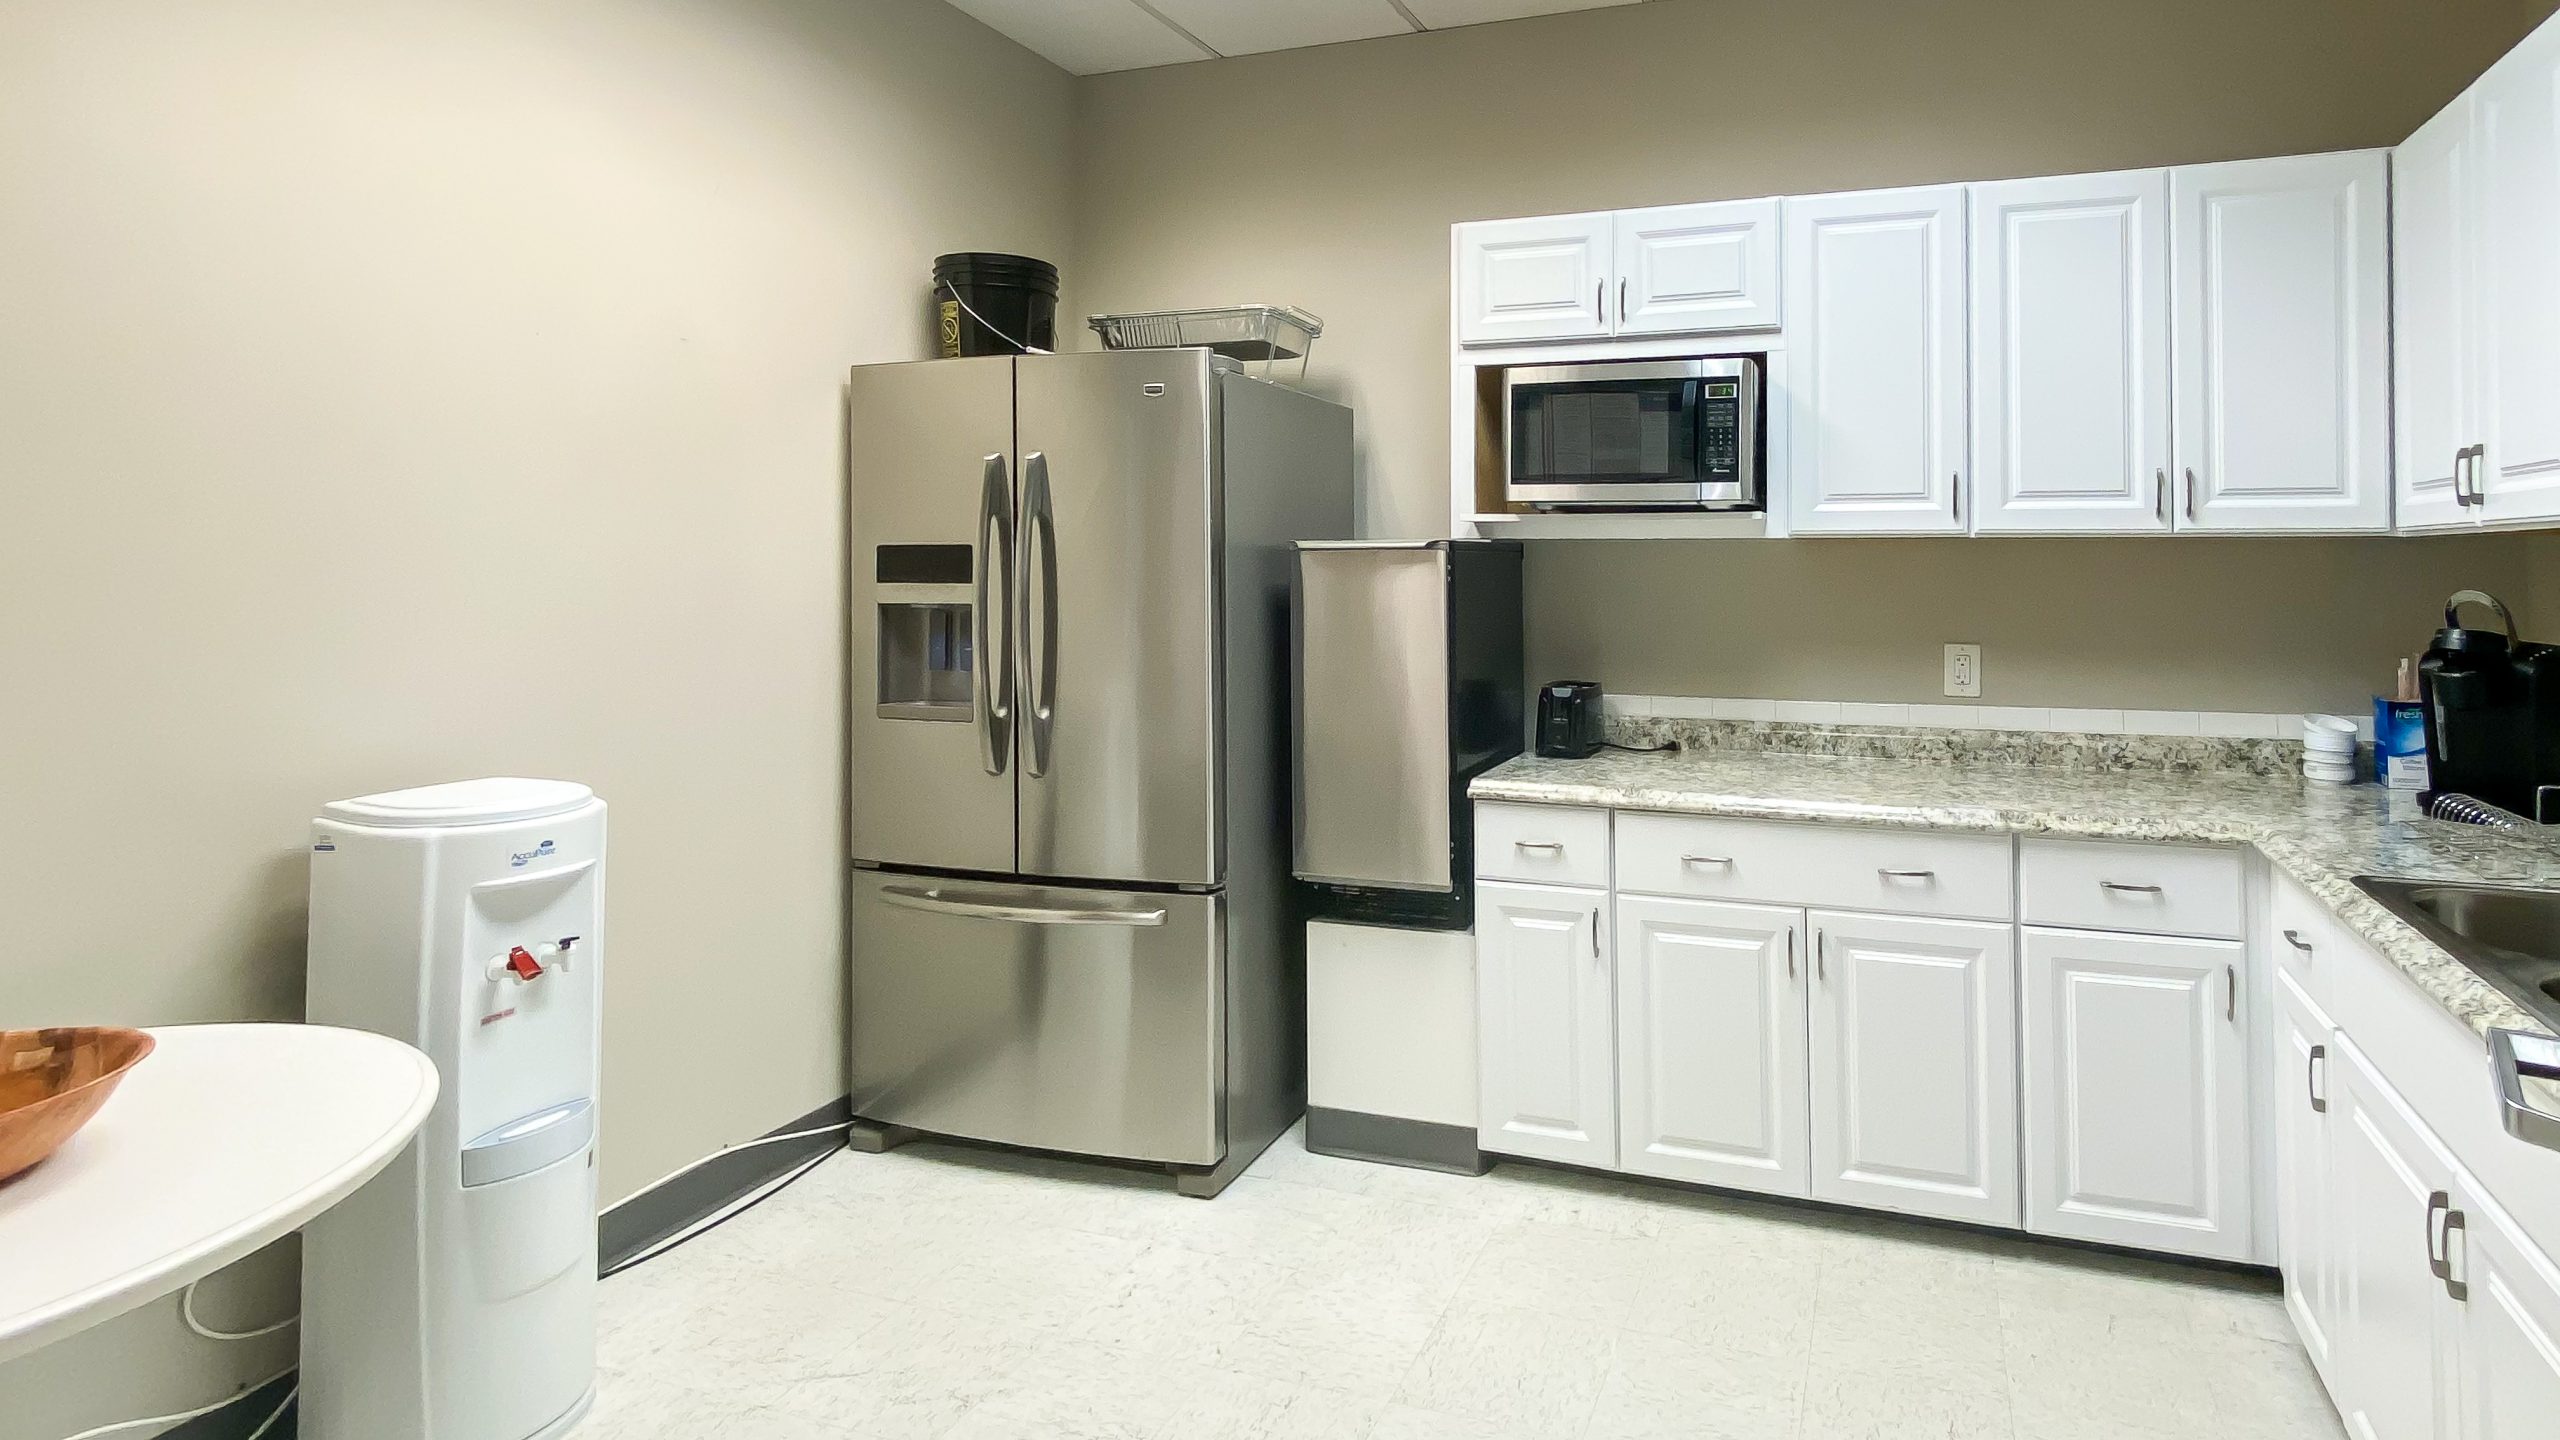 The interior of an office kitchen for lease.